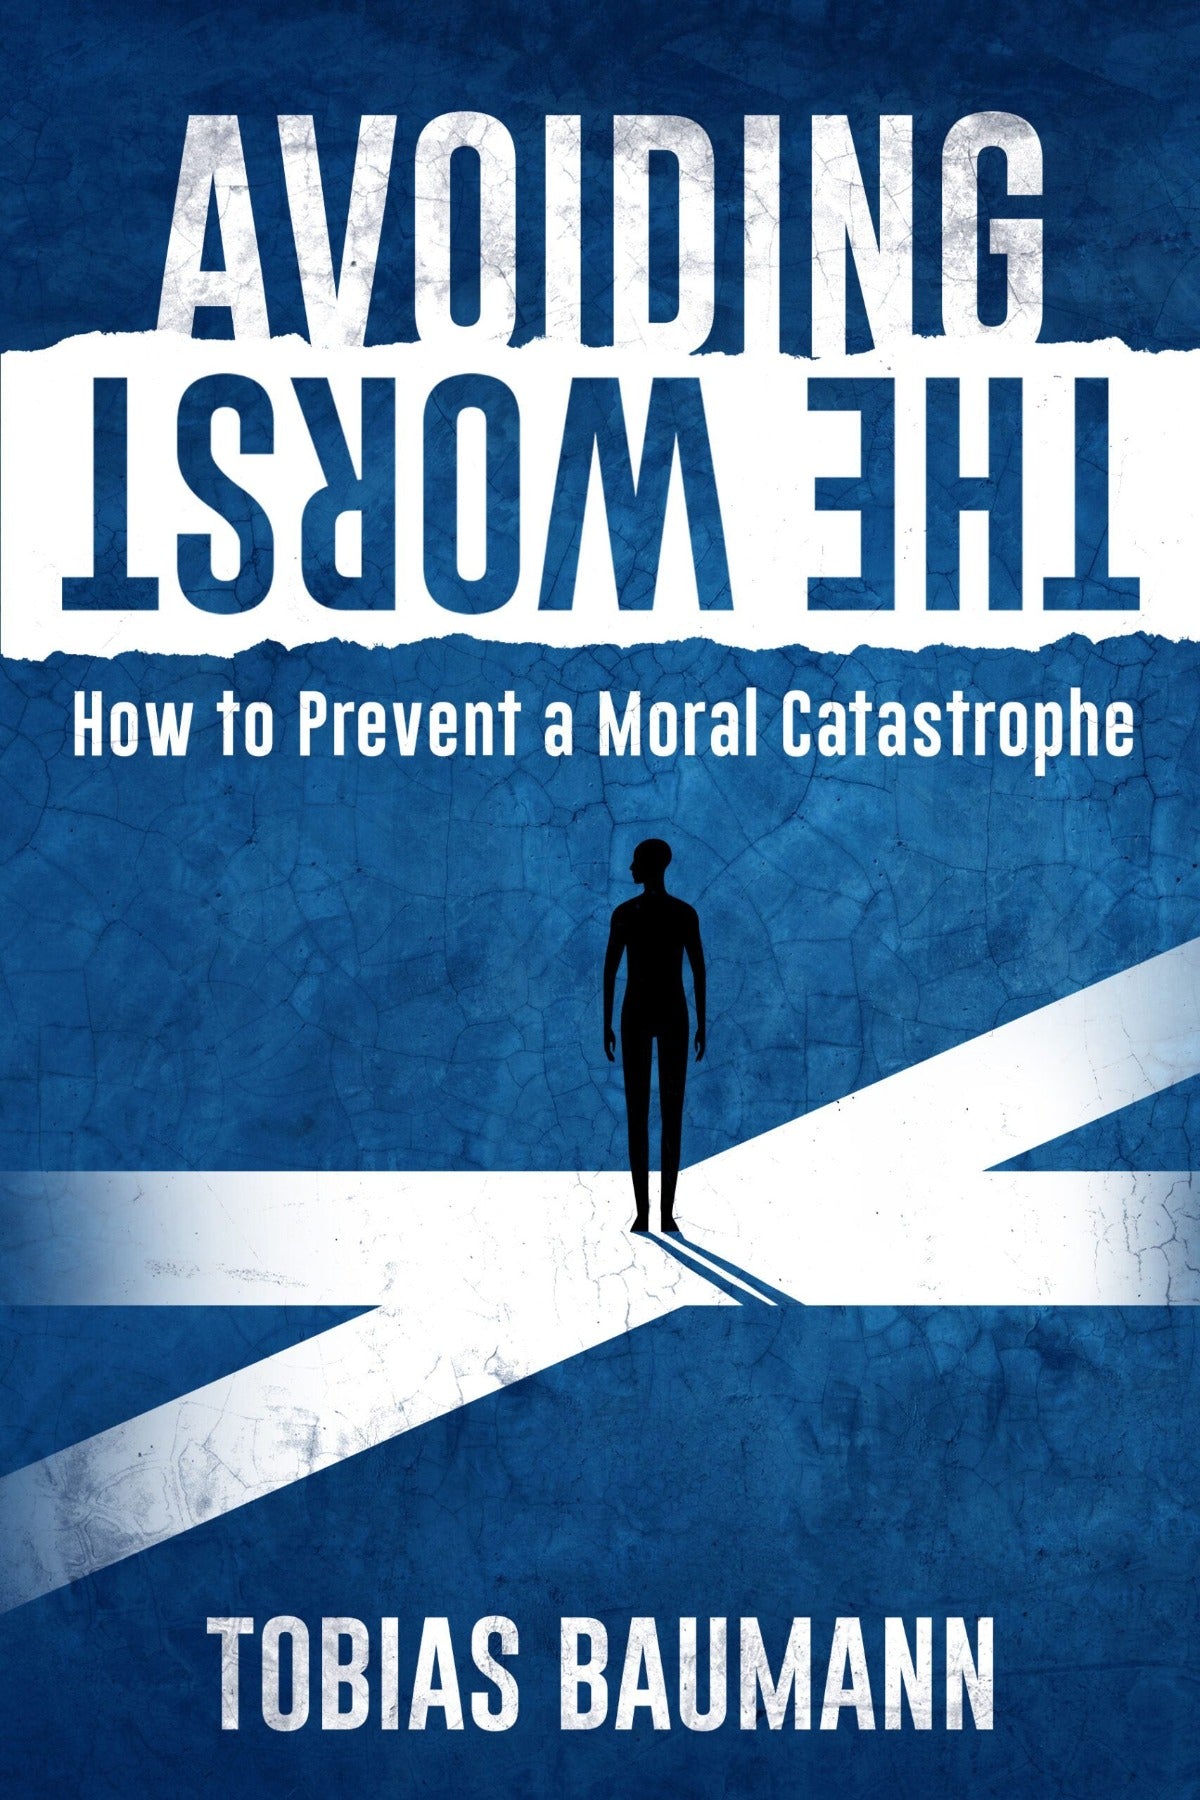 Avoiding the Worst: How to Prevent a Moral Catastrophe